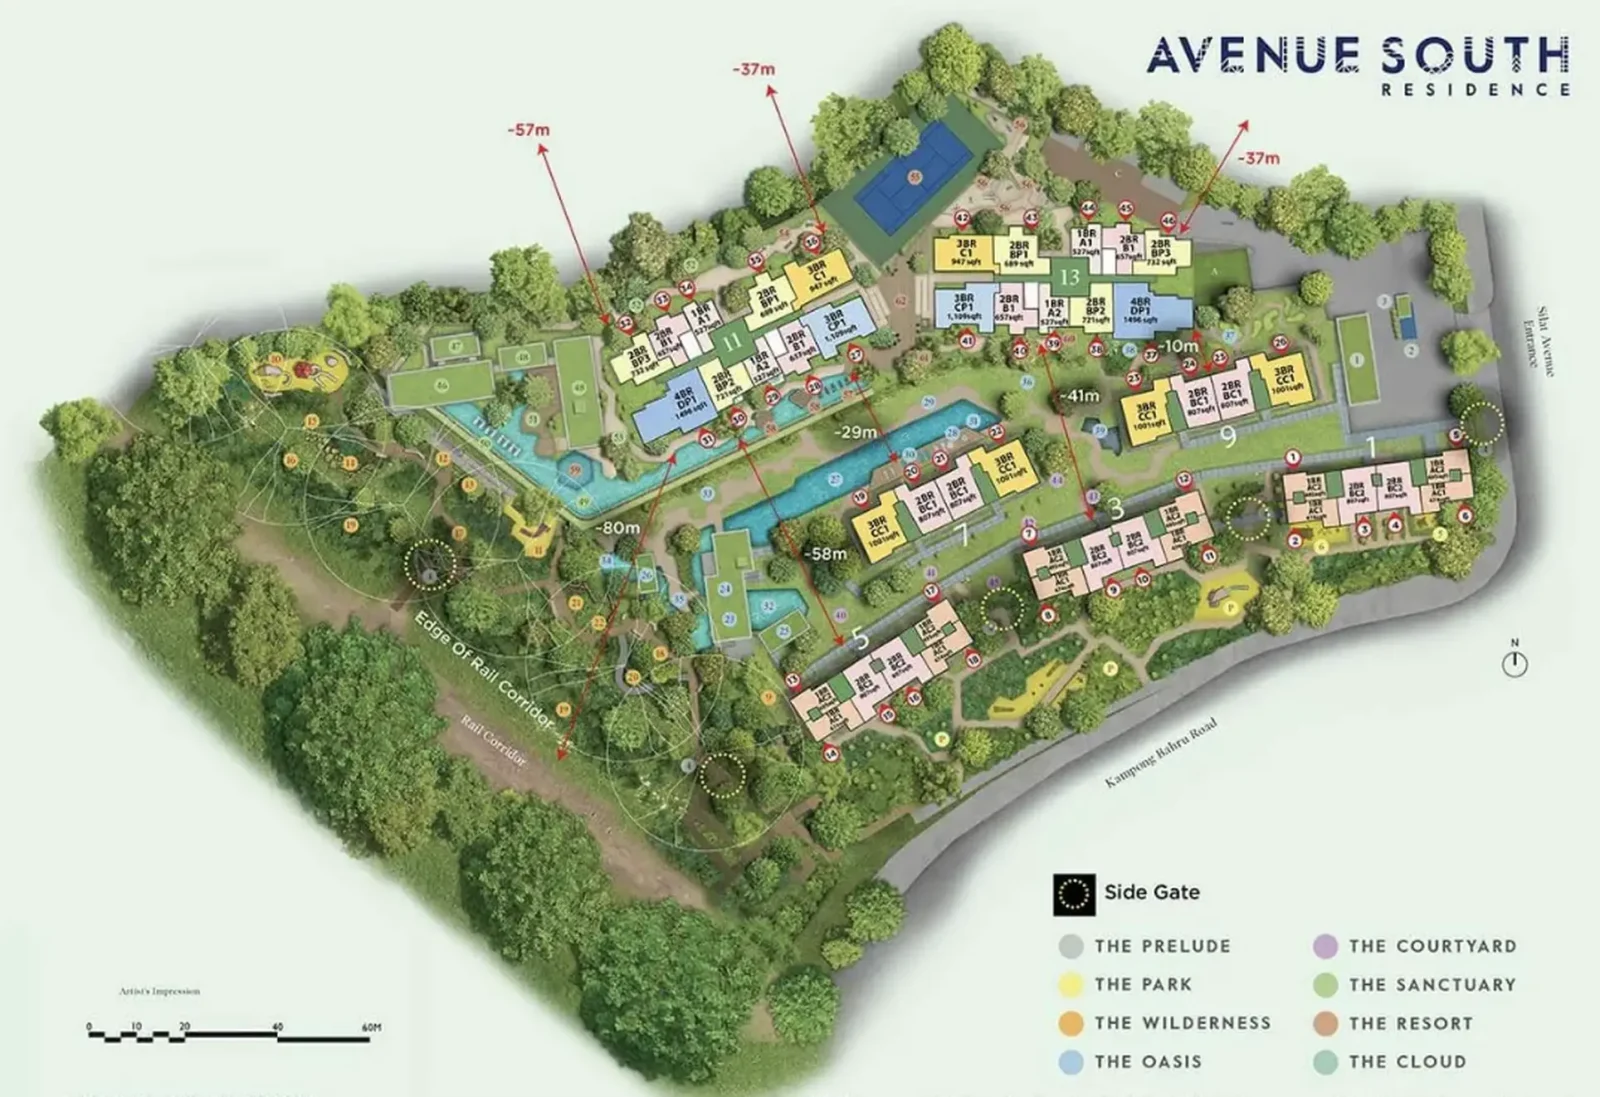 Avenue South Residences Resident Review 1 site plan